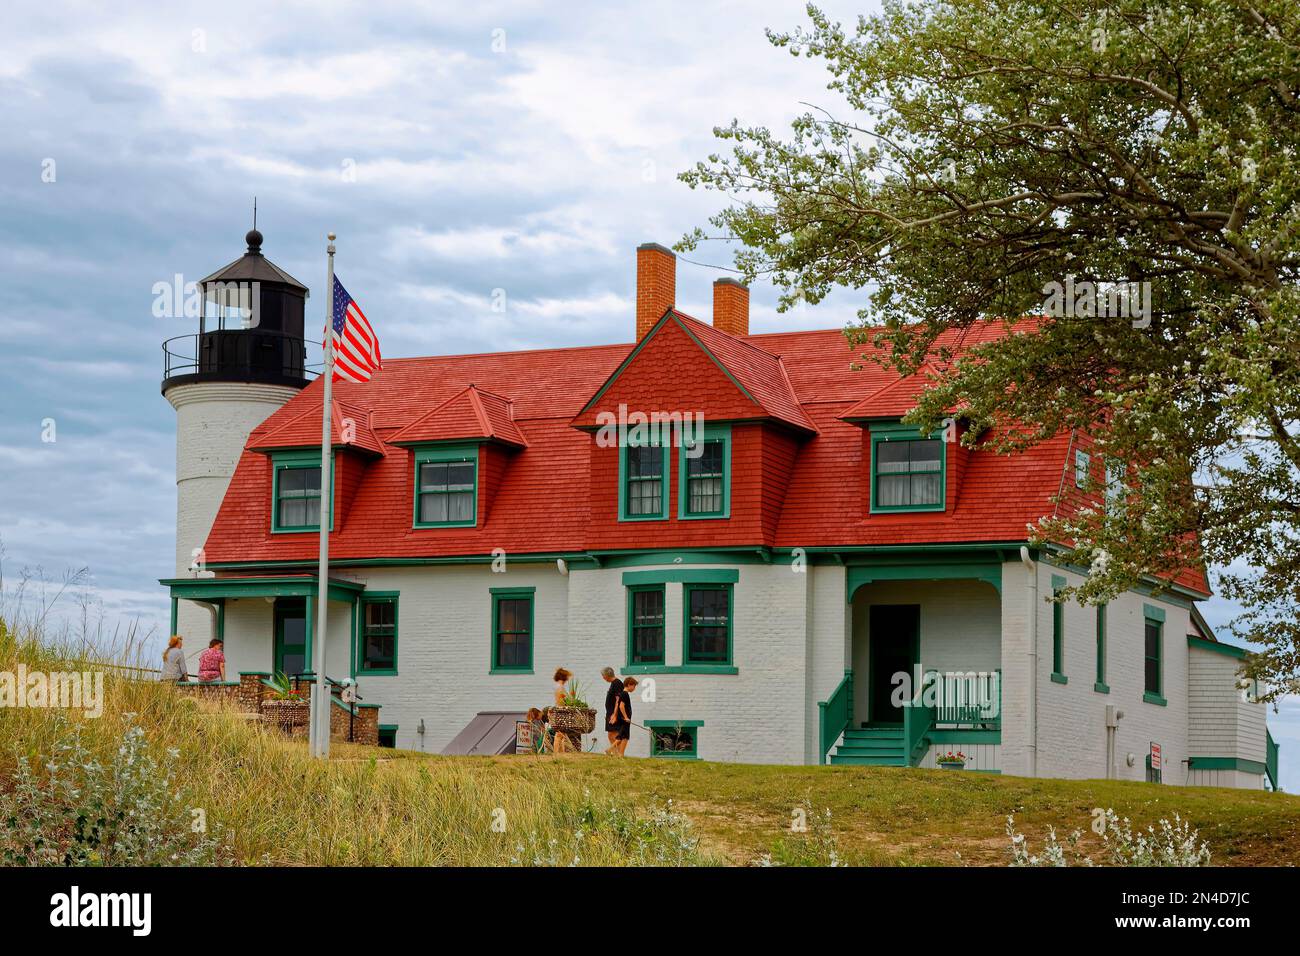 Point Betsie Lighthouse; 1858; Navigationshilfe; Leuchtfeuer, weiß, Black Top, People, Keeper's House, Red Roof, National Register of Historic Places; Mi Stockfoto